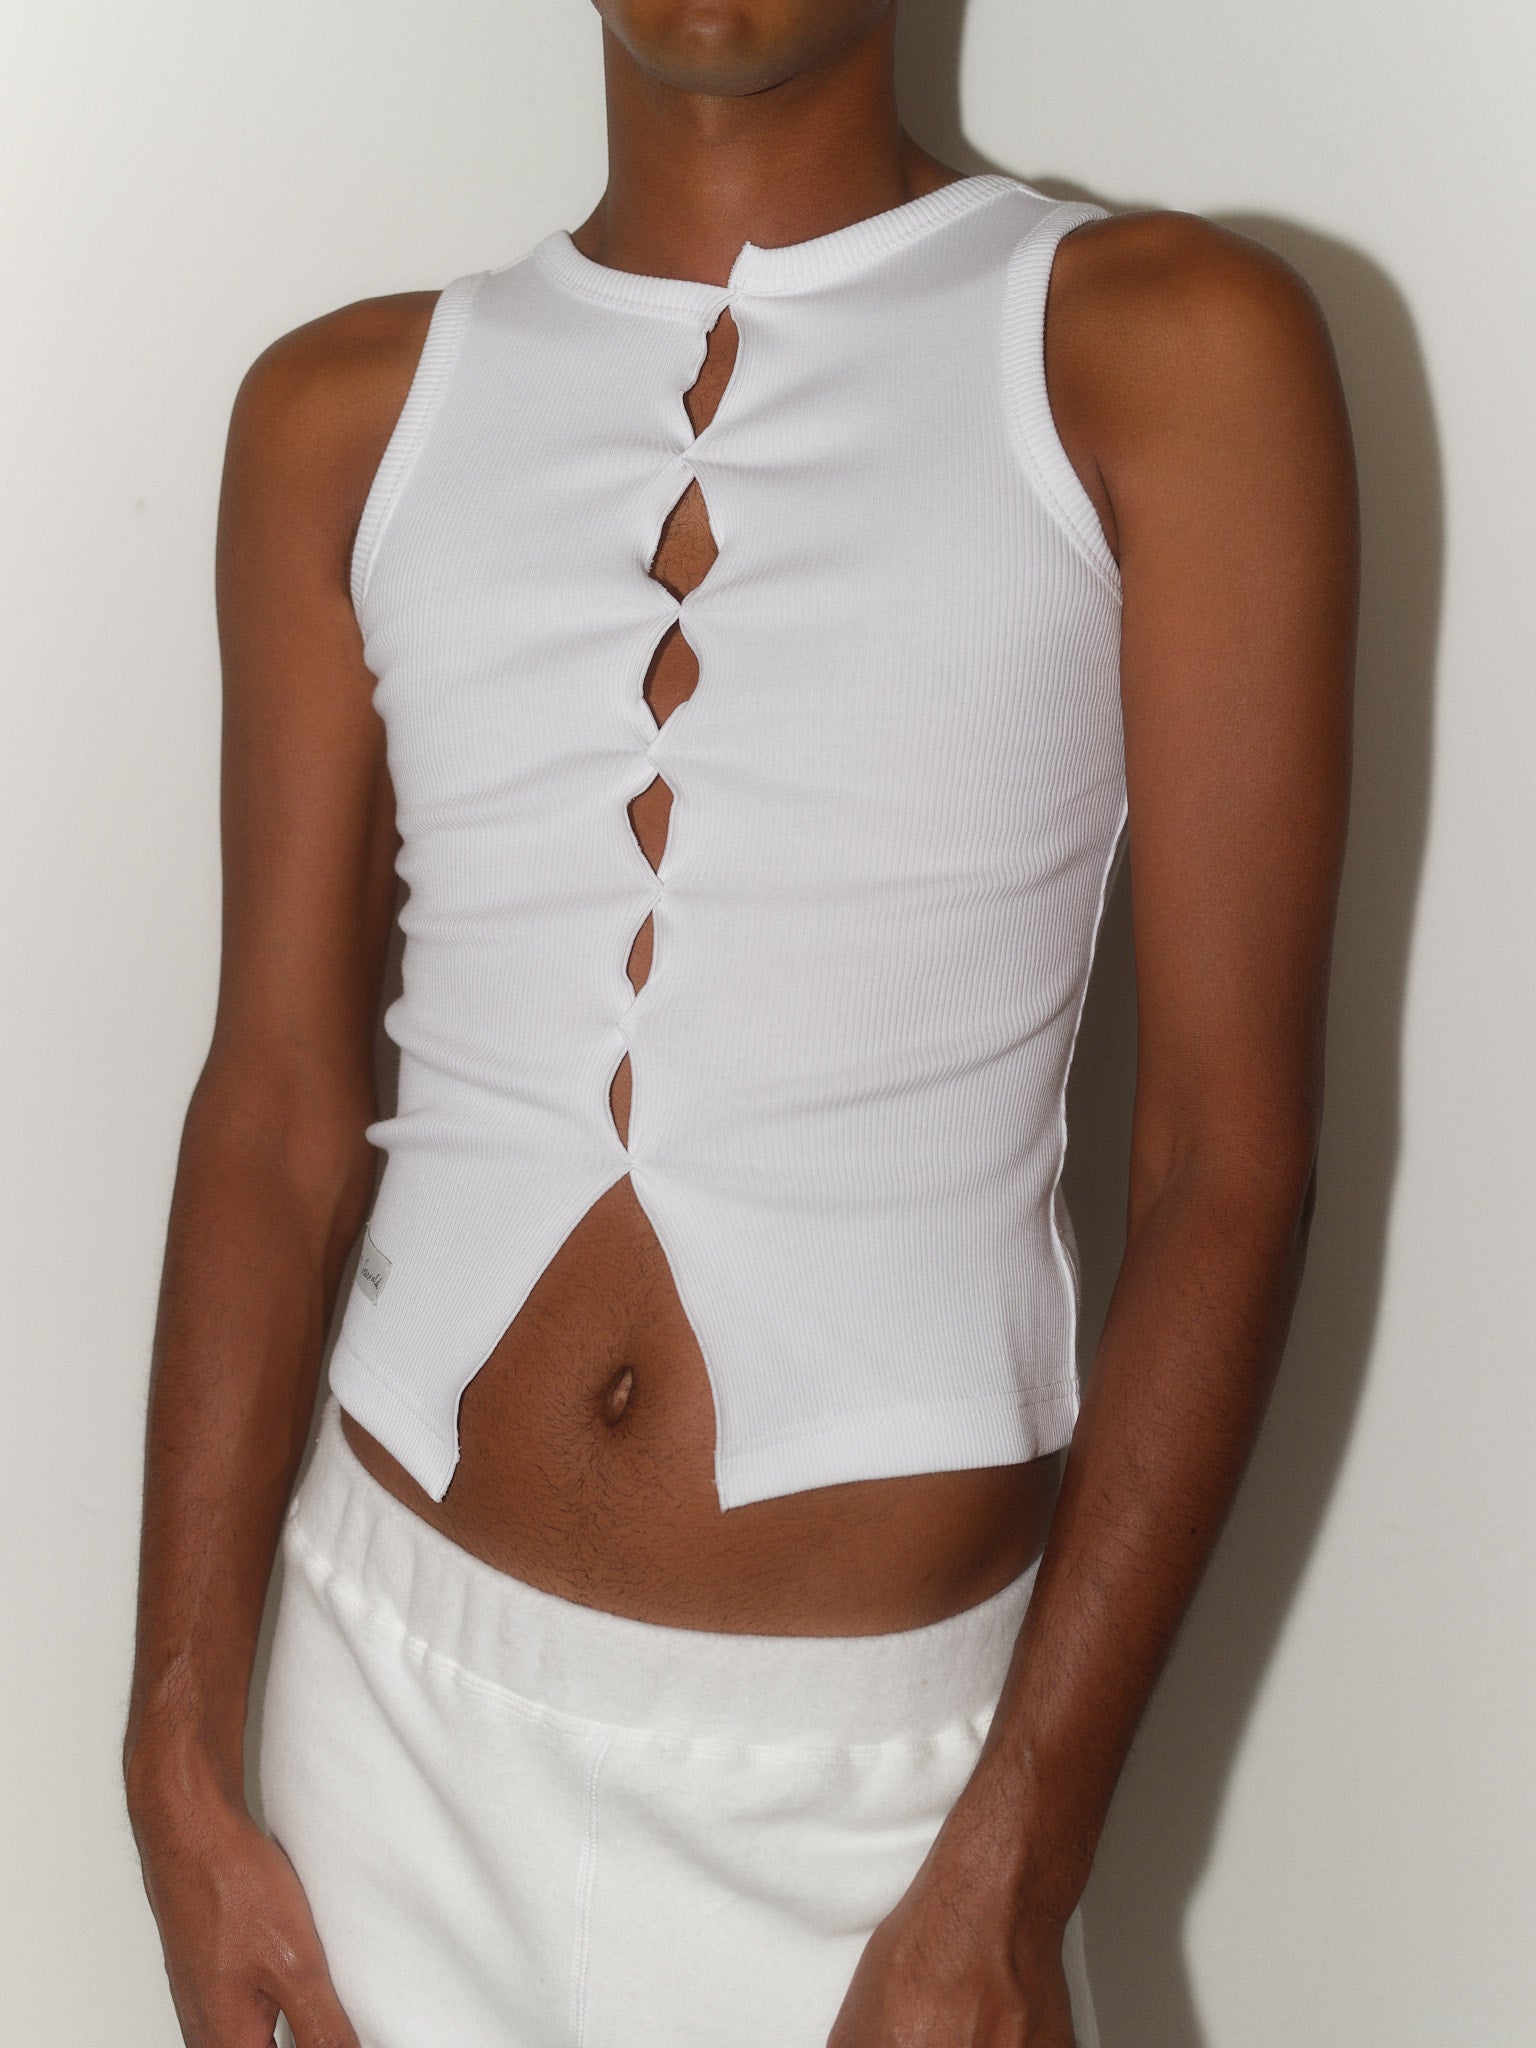 Draped Cotton Jersey Tank Top designed by Christina Seewald. Sustainable, designed and made in Europe.